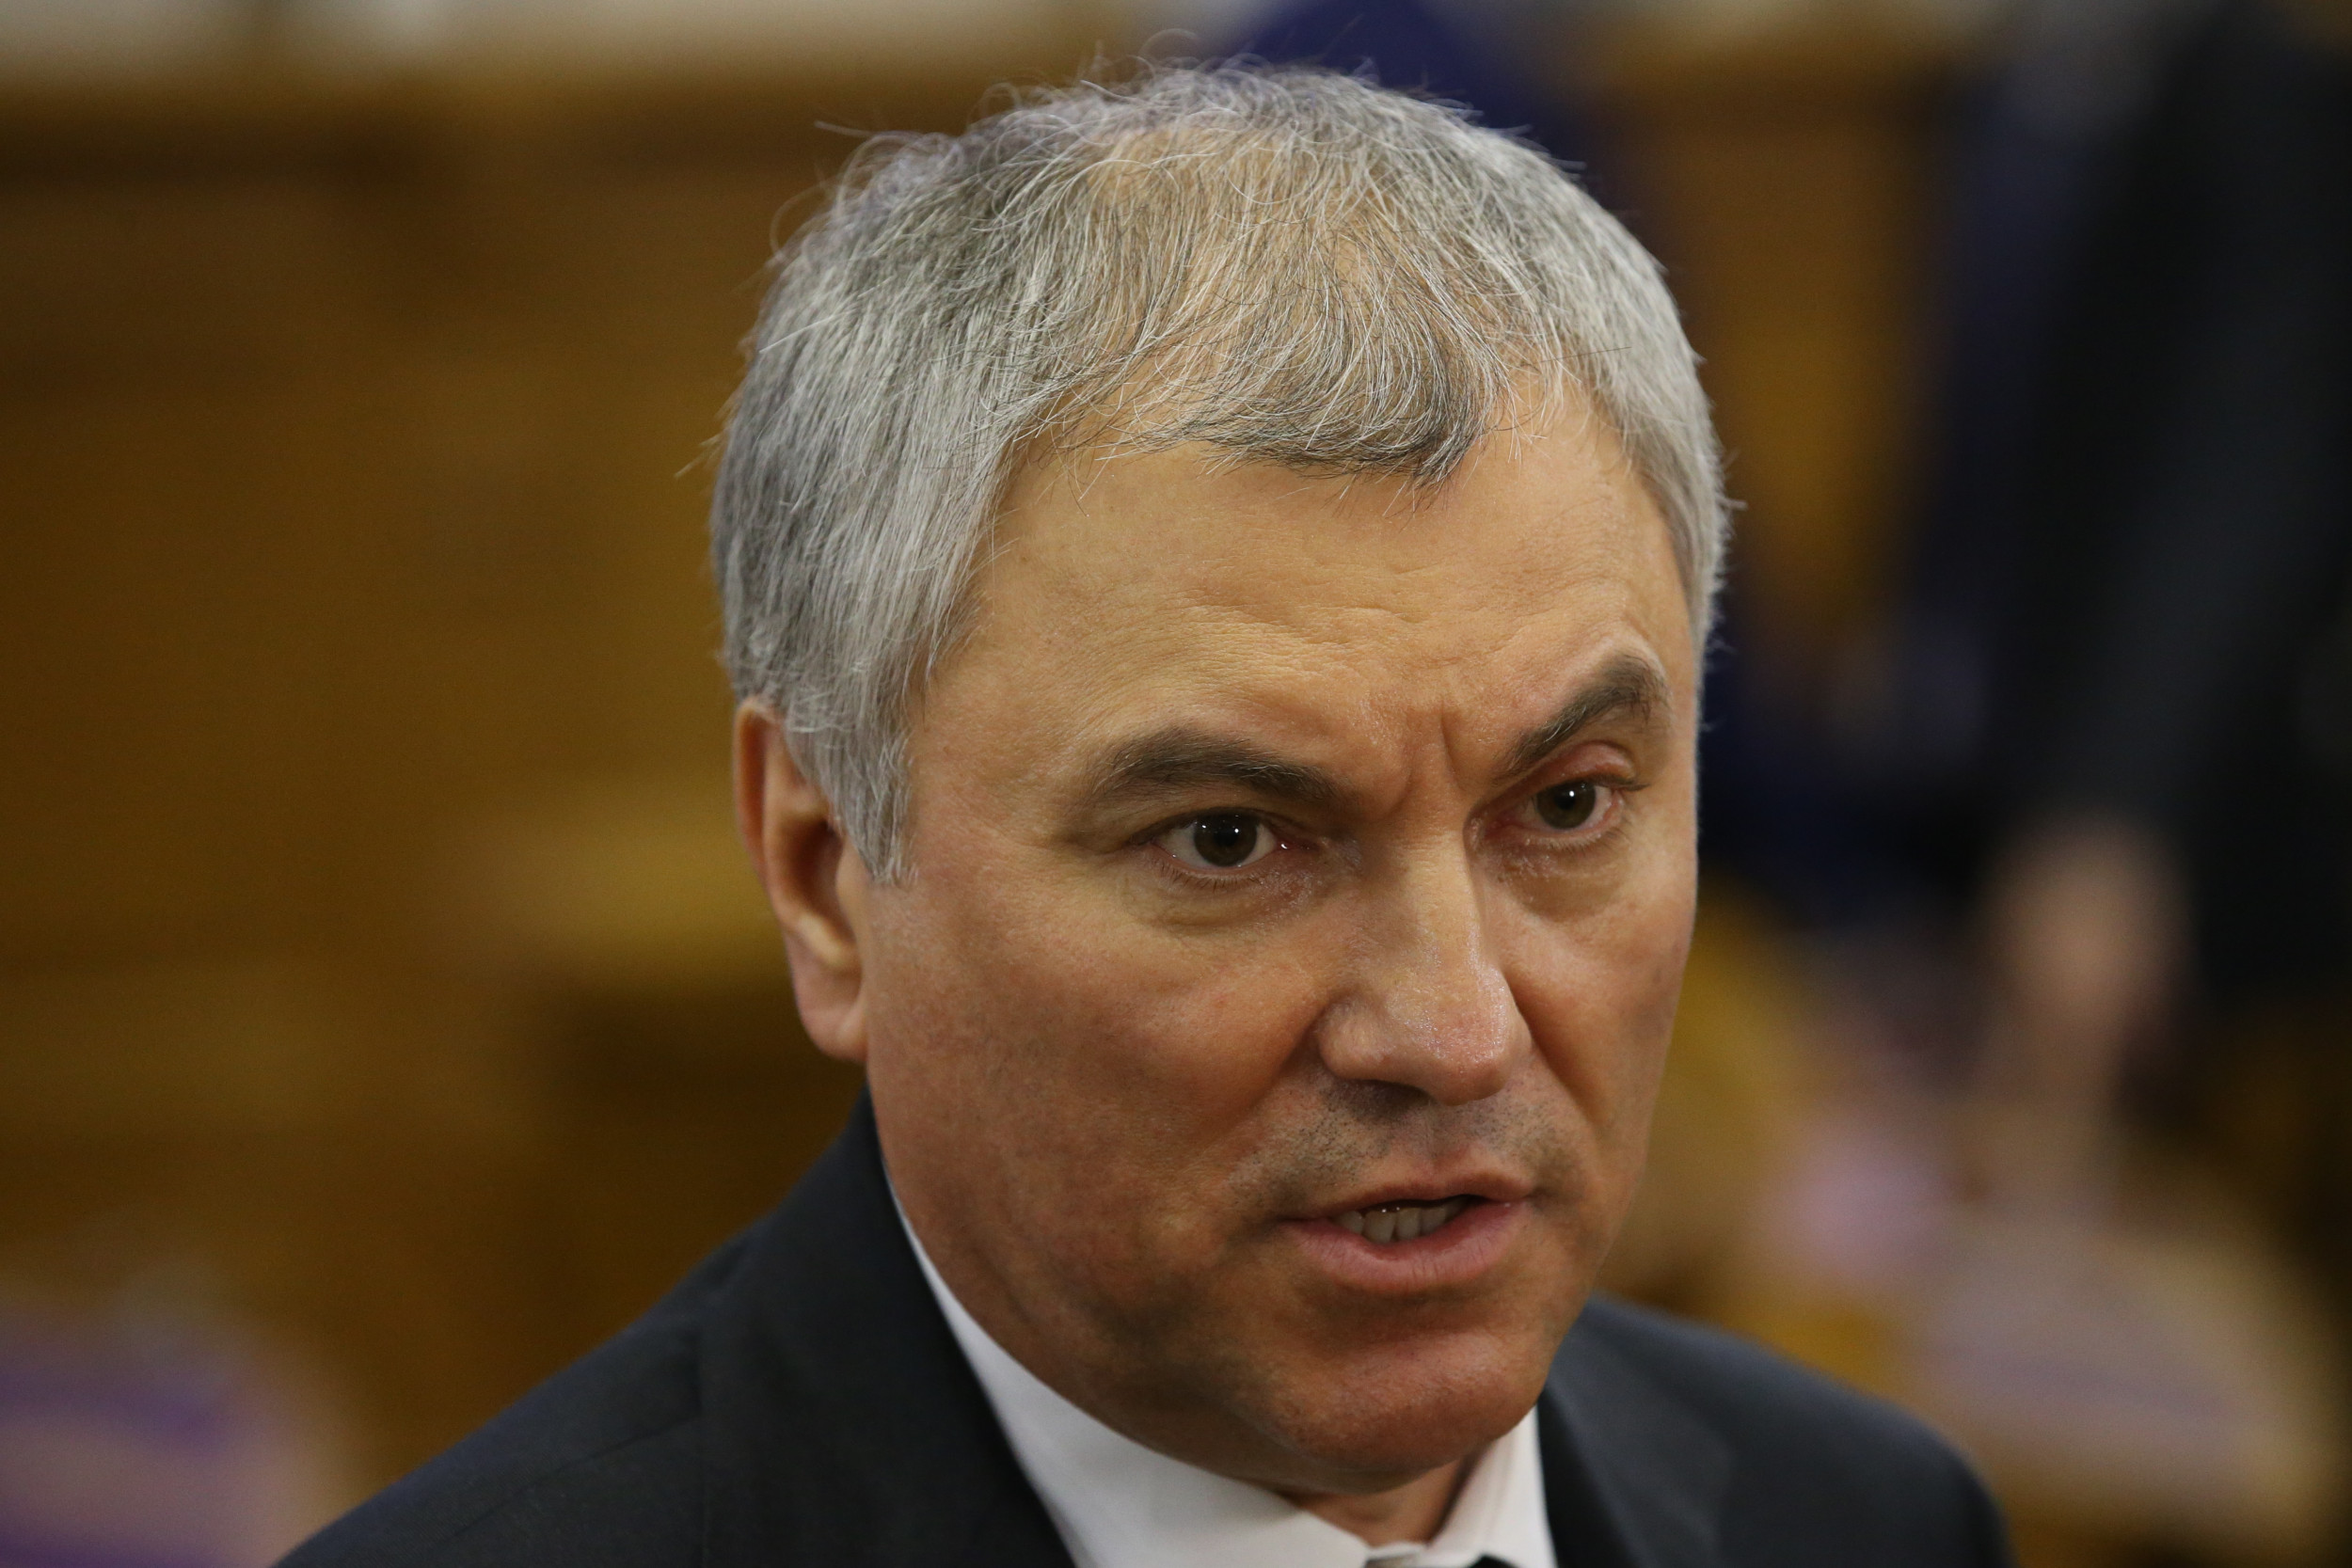 Russia warns Europe would "disappear" if West gives nuclear weapons to Ukraine